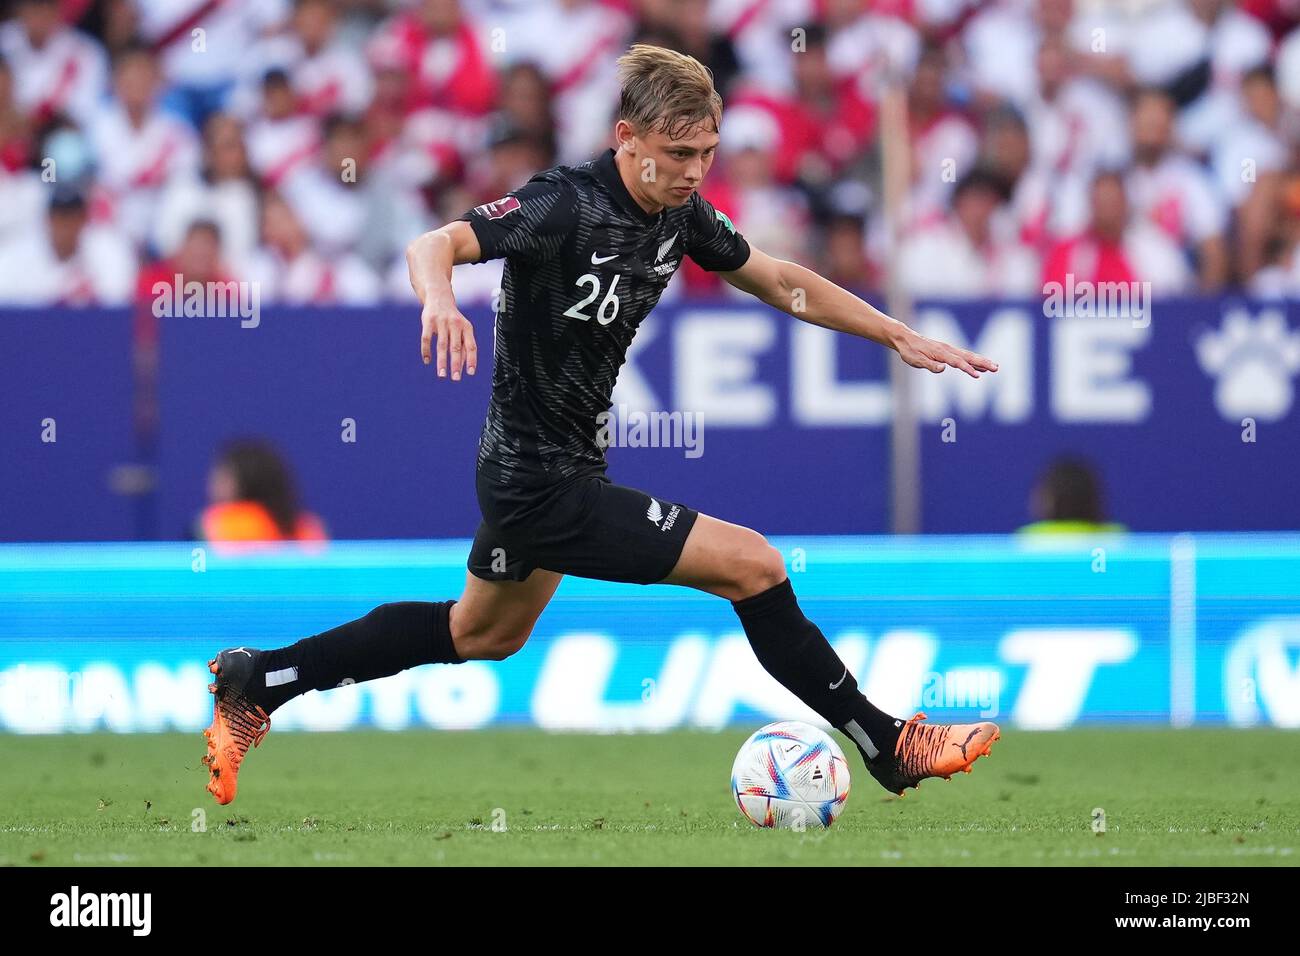 Barcelona, Spain. June 5, 2022, Ben Waine of New Zealand during the friendly match between Peru and New Zealand played at RCDE Stadium on June 5, 2022 in Barcelona, Spain. (Photo by Bagu Blanco / PRESSINPHOTO) Stock Photo